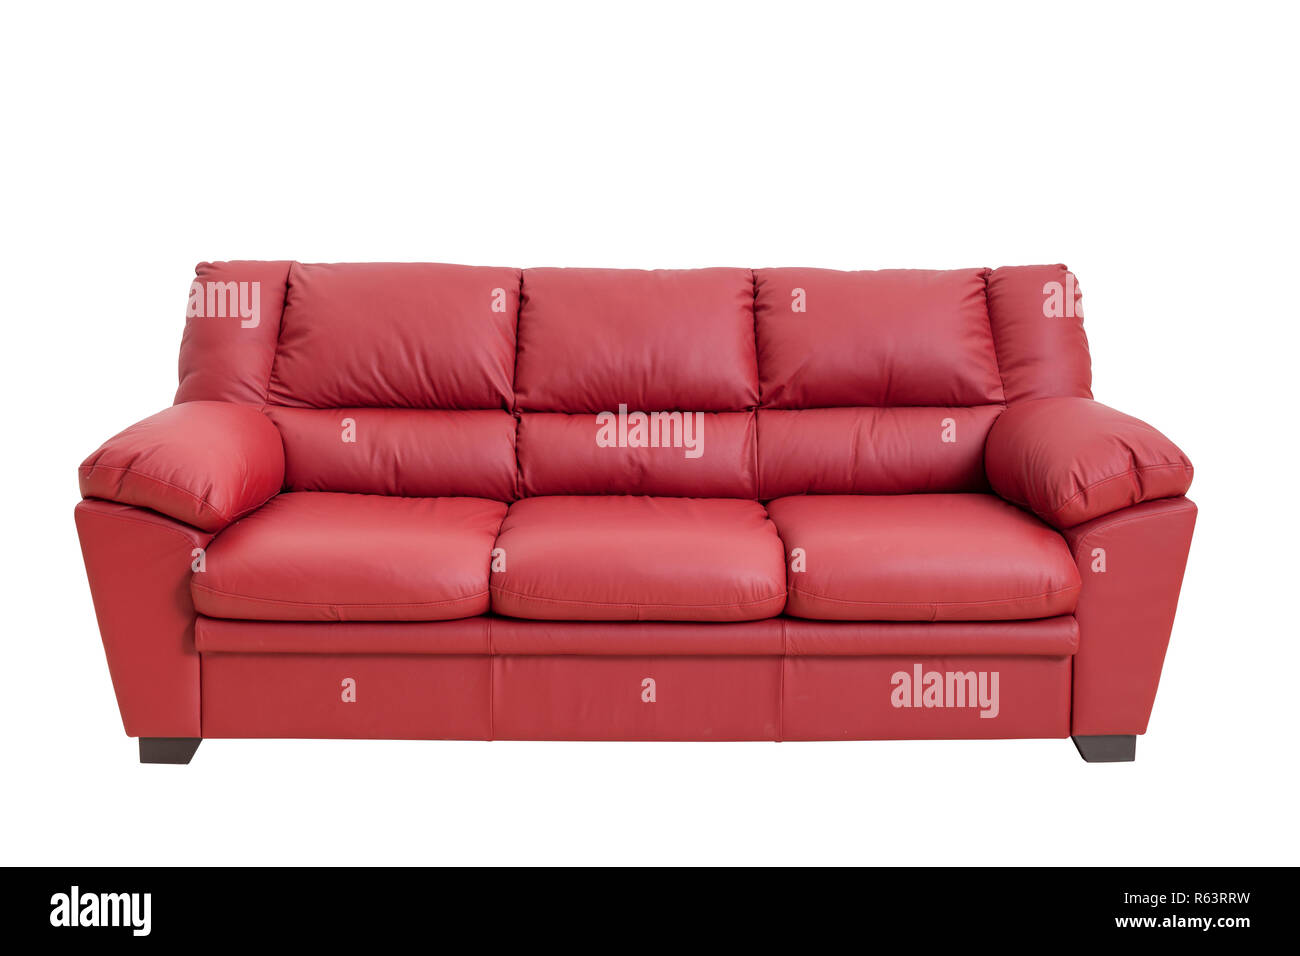 Three seats cozy leather sofa in nice red color, isolated on white - Stock image with clipping path. Sofa, Leather, Decor, Furniture, Home Interior Stock Photo